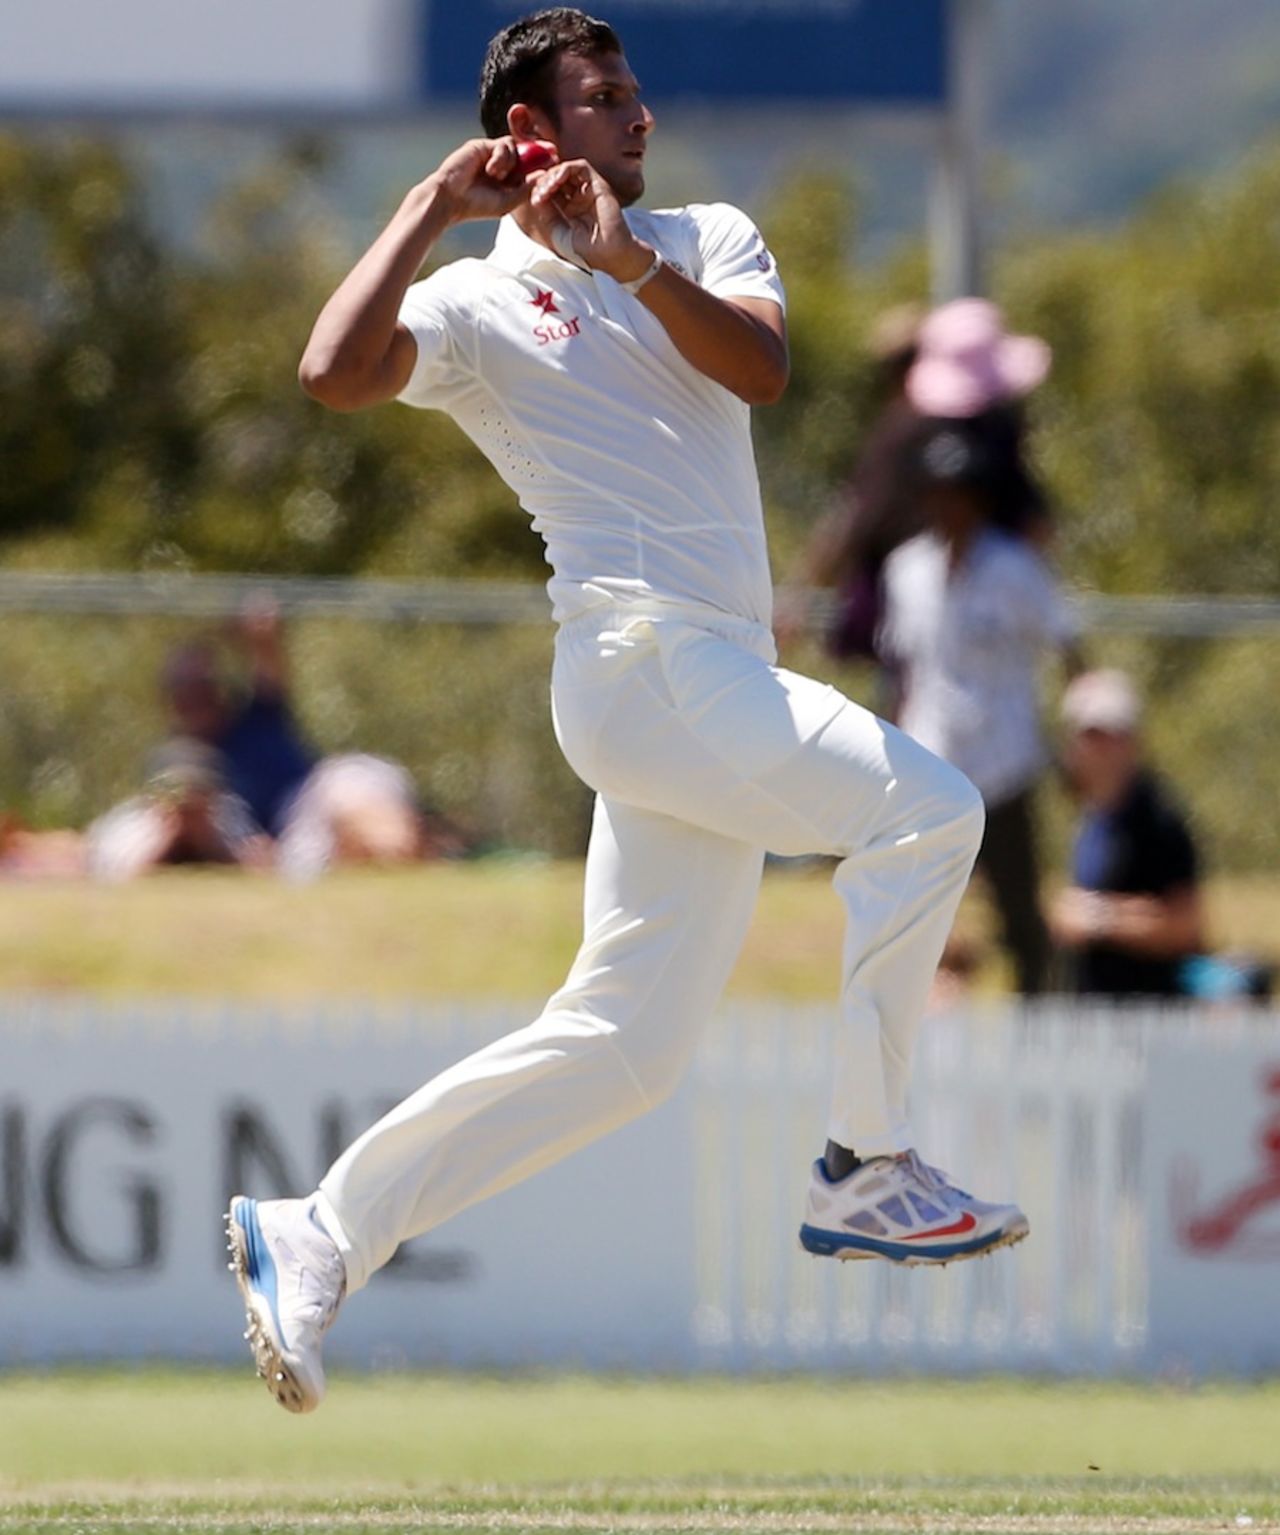 Ishwar Pandey in delivery stride, New Zealand XI v Indians, Whangarei, 1st day, February 2, 2014